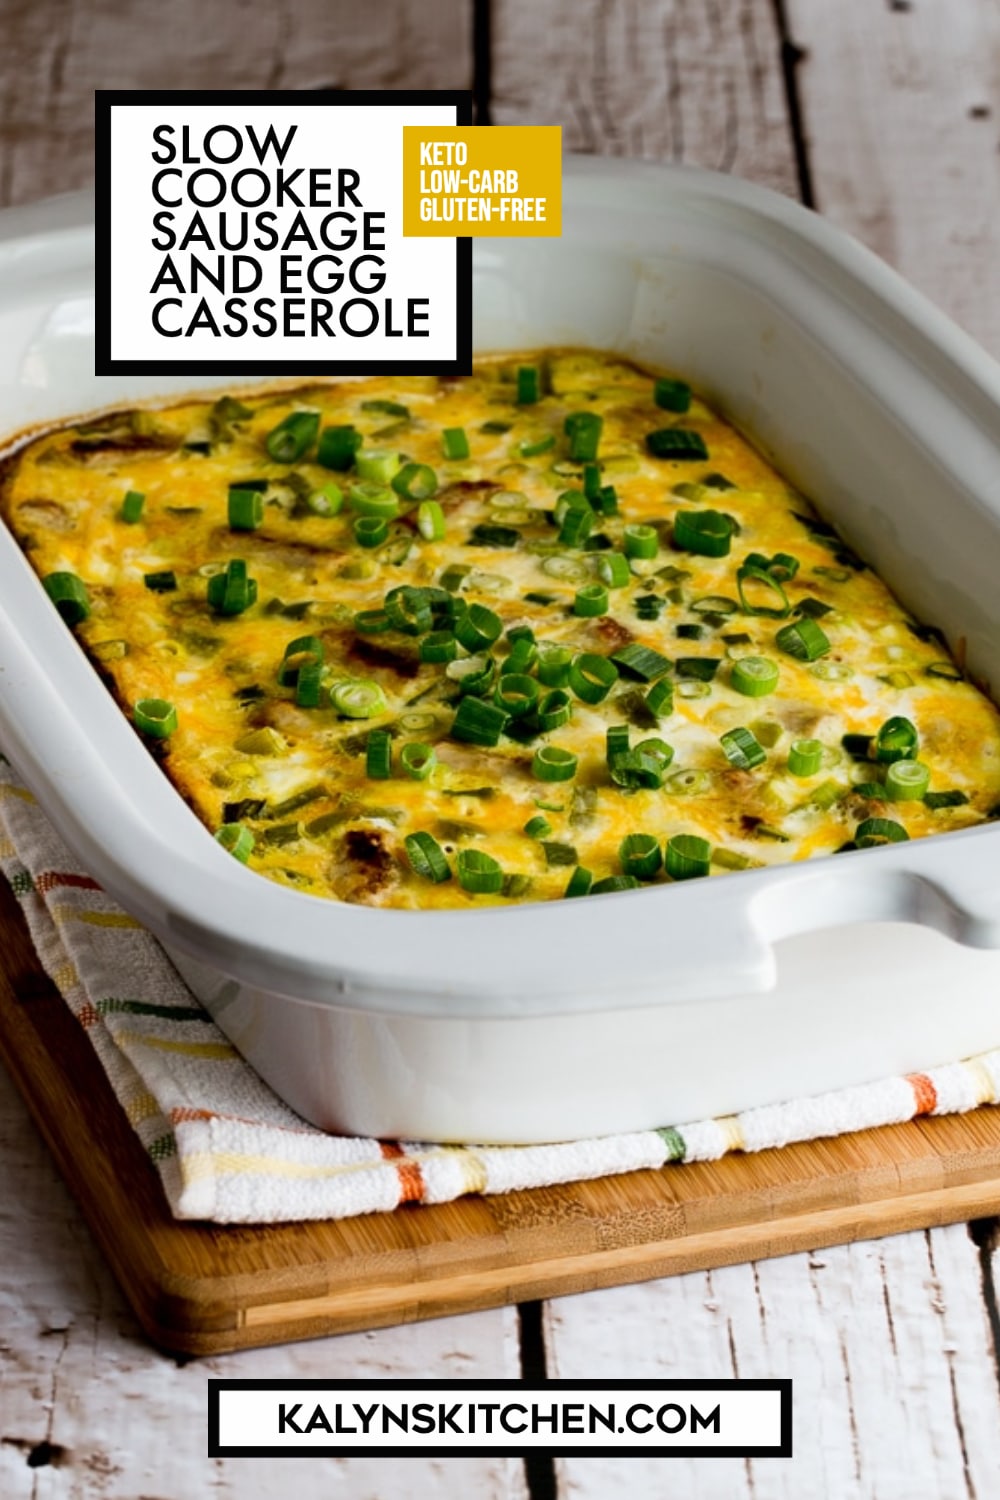 Pinterest image of Slow Cooker Sausage and Egg Casserole